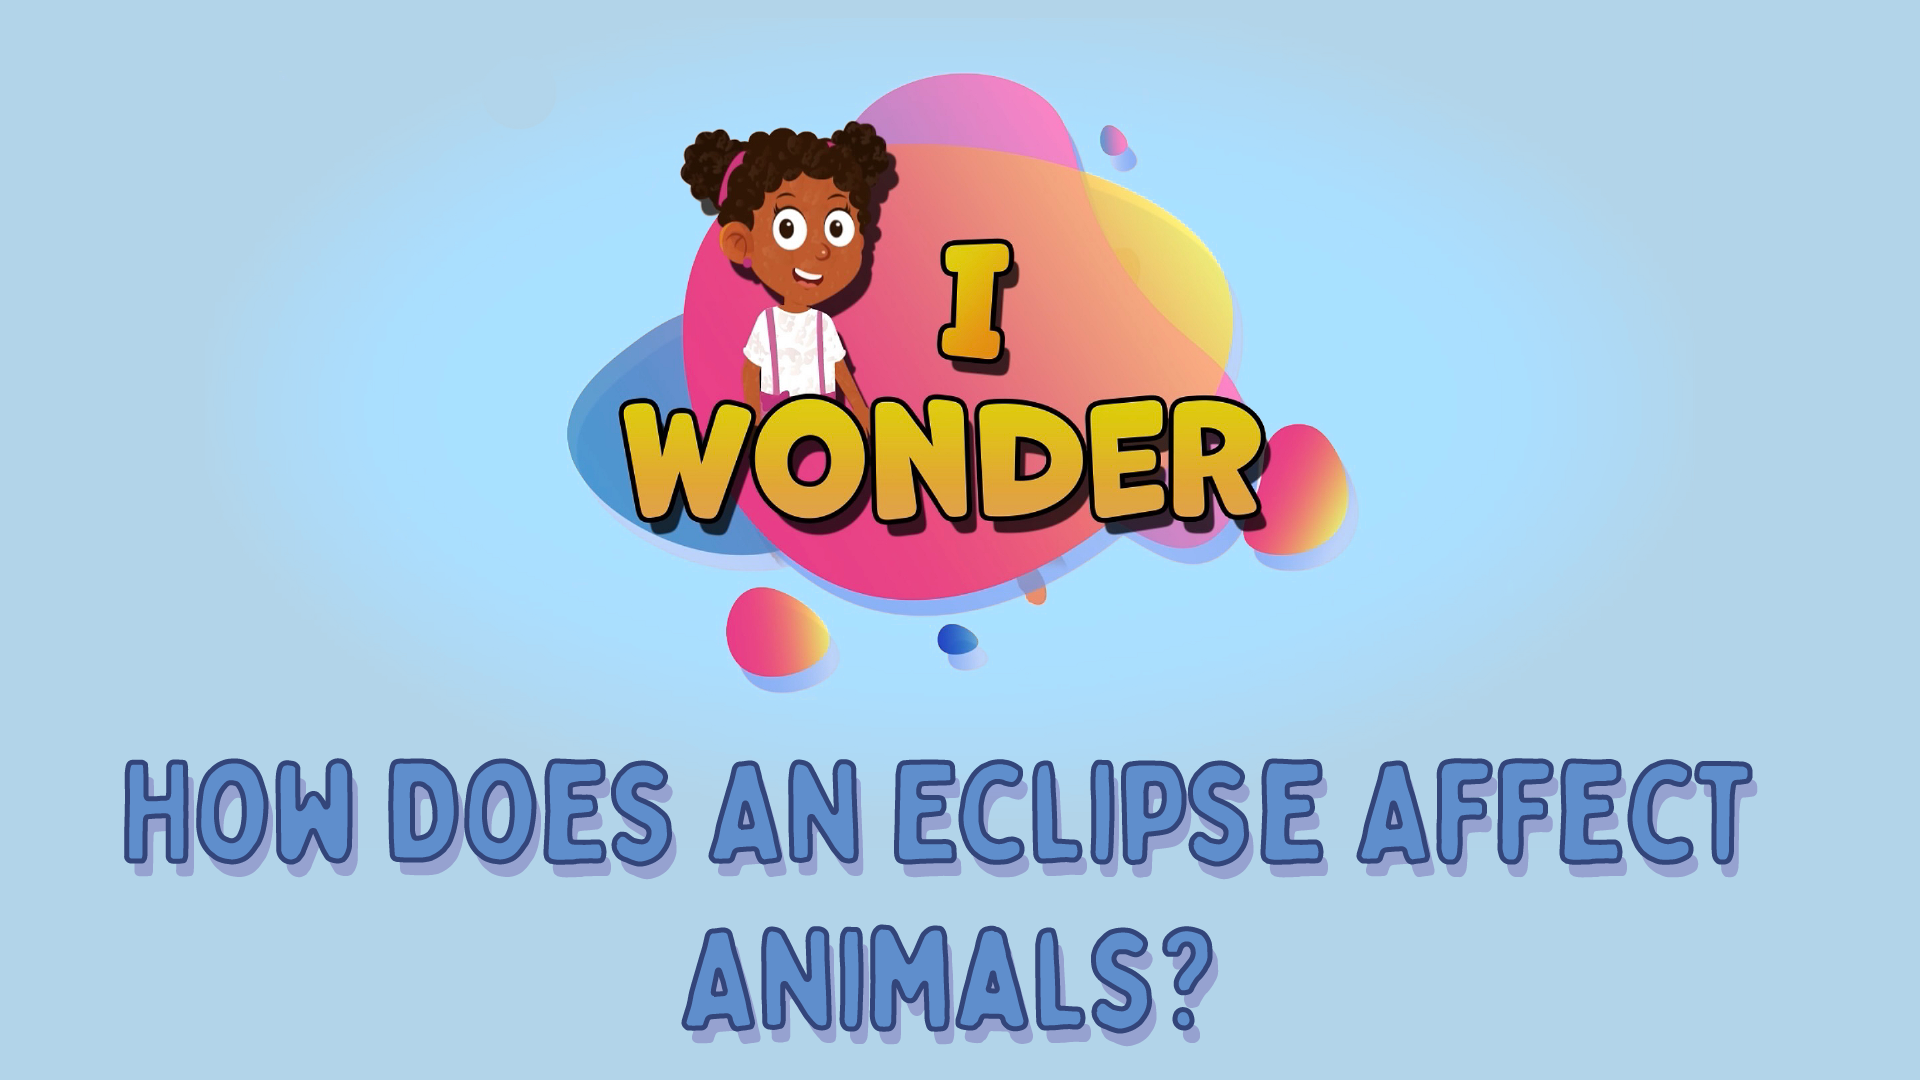 How Does An Eclipse Affect Animals?